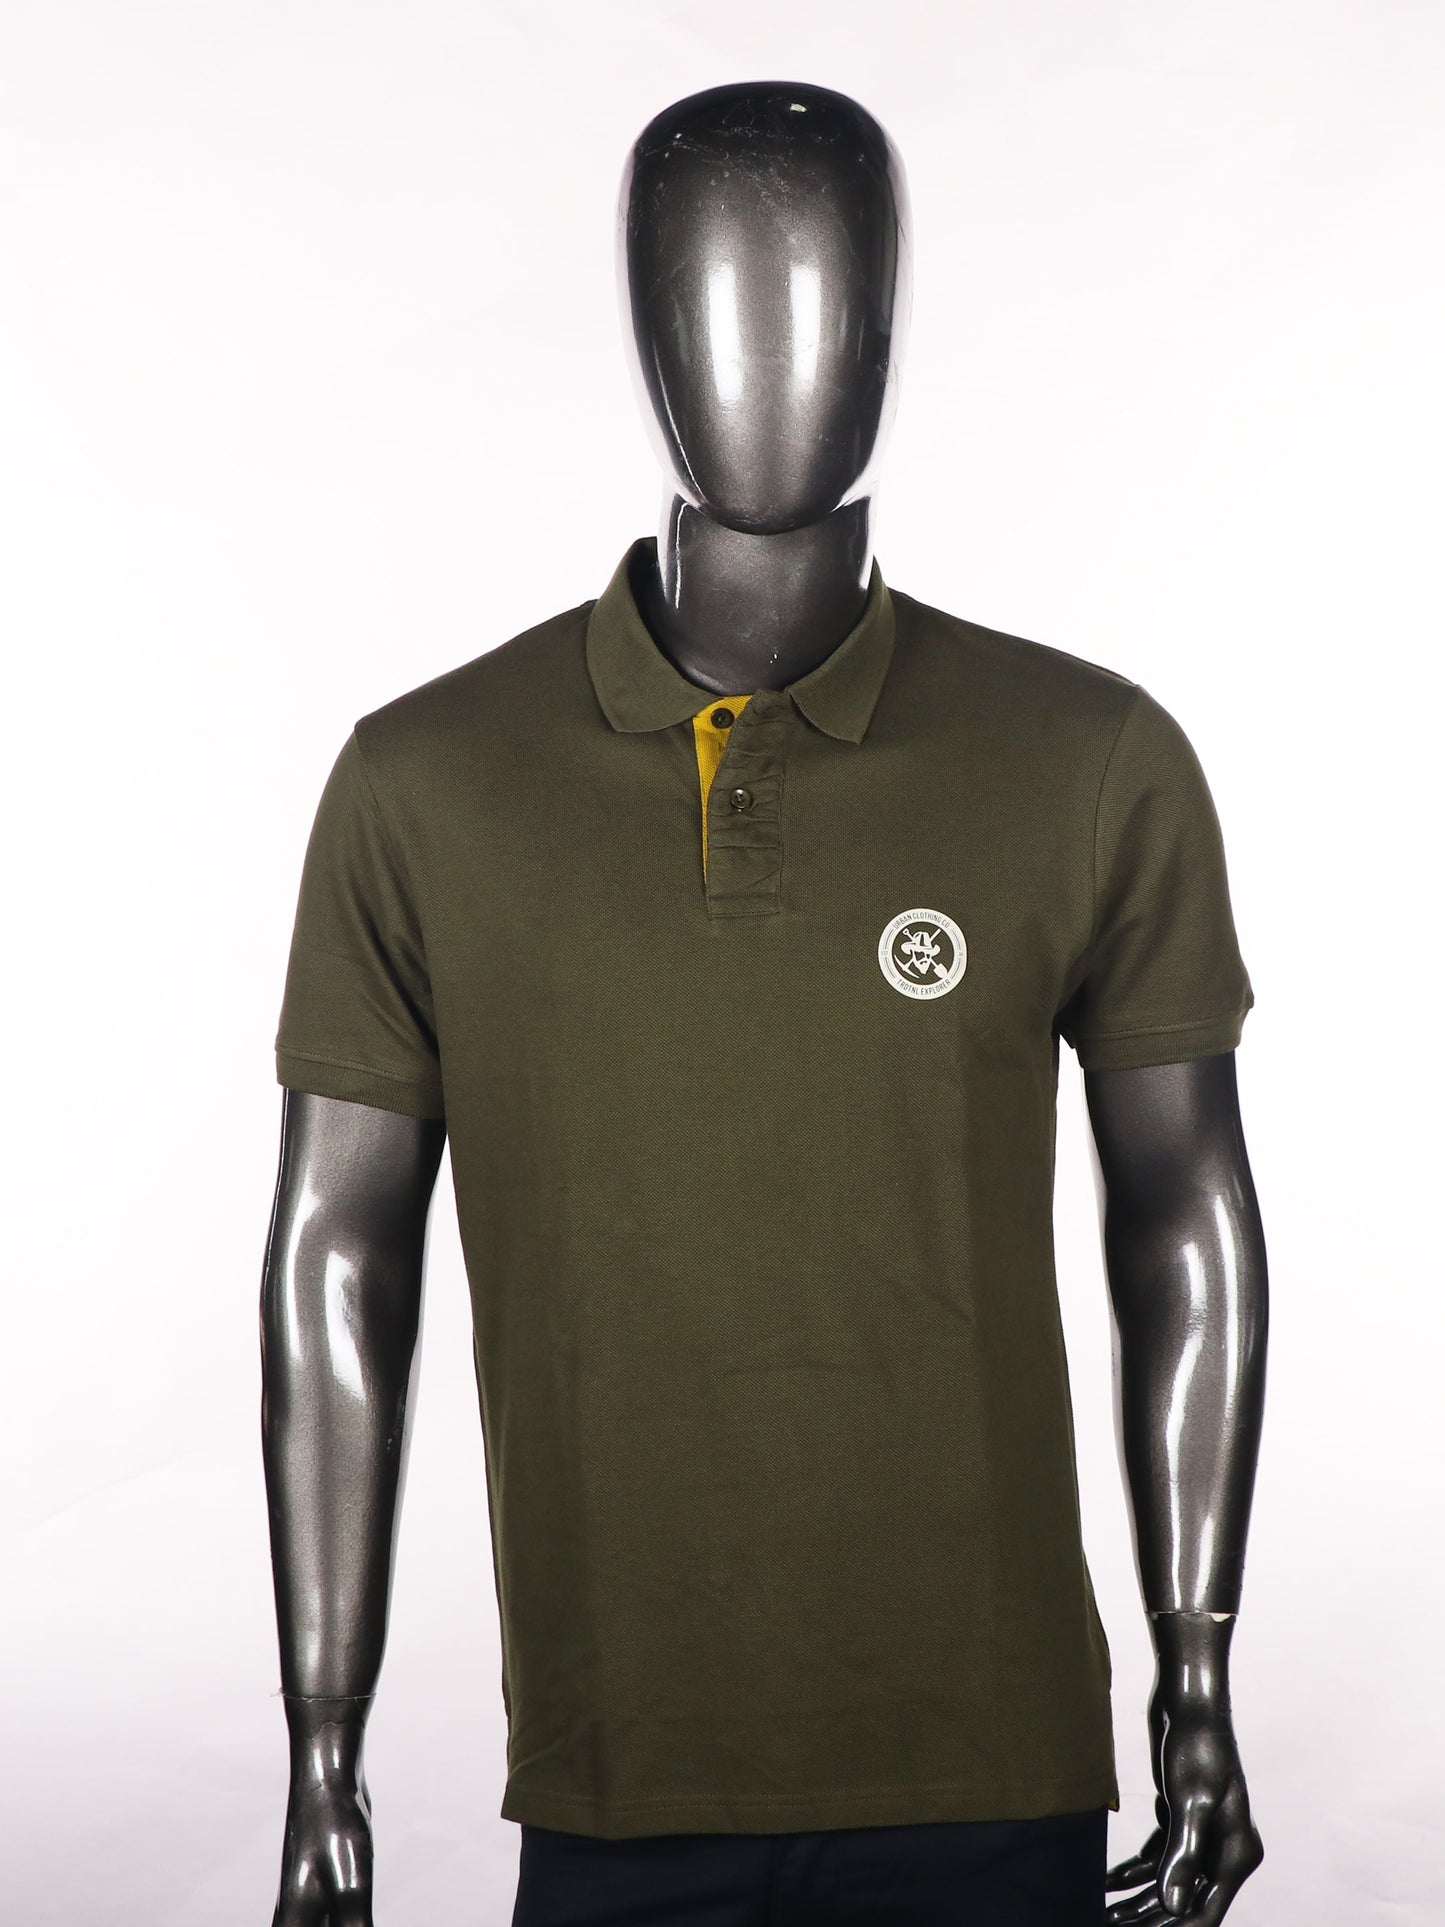 Slim Fit Dark Olive Color Polo T-Shirt in pique fabric